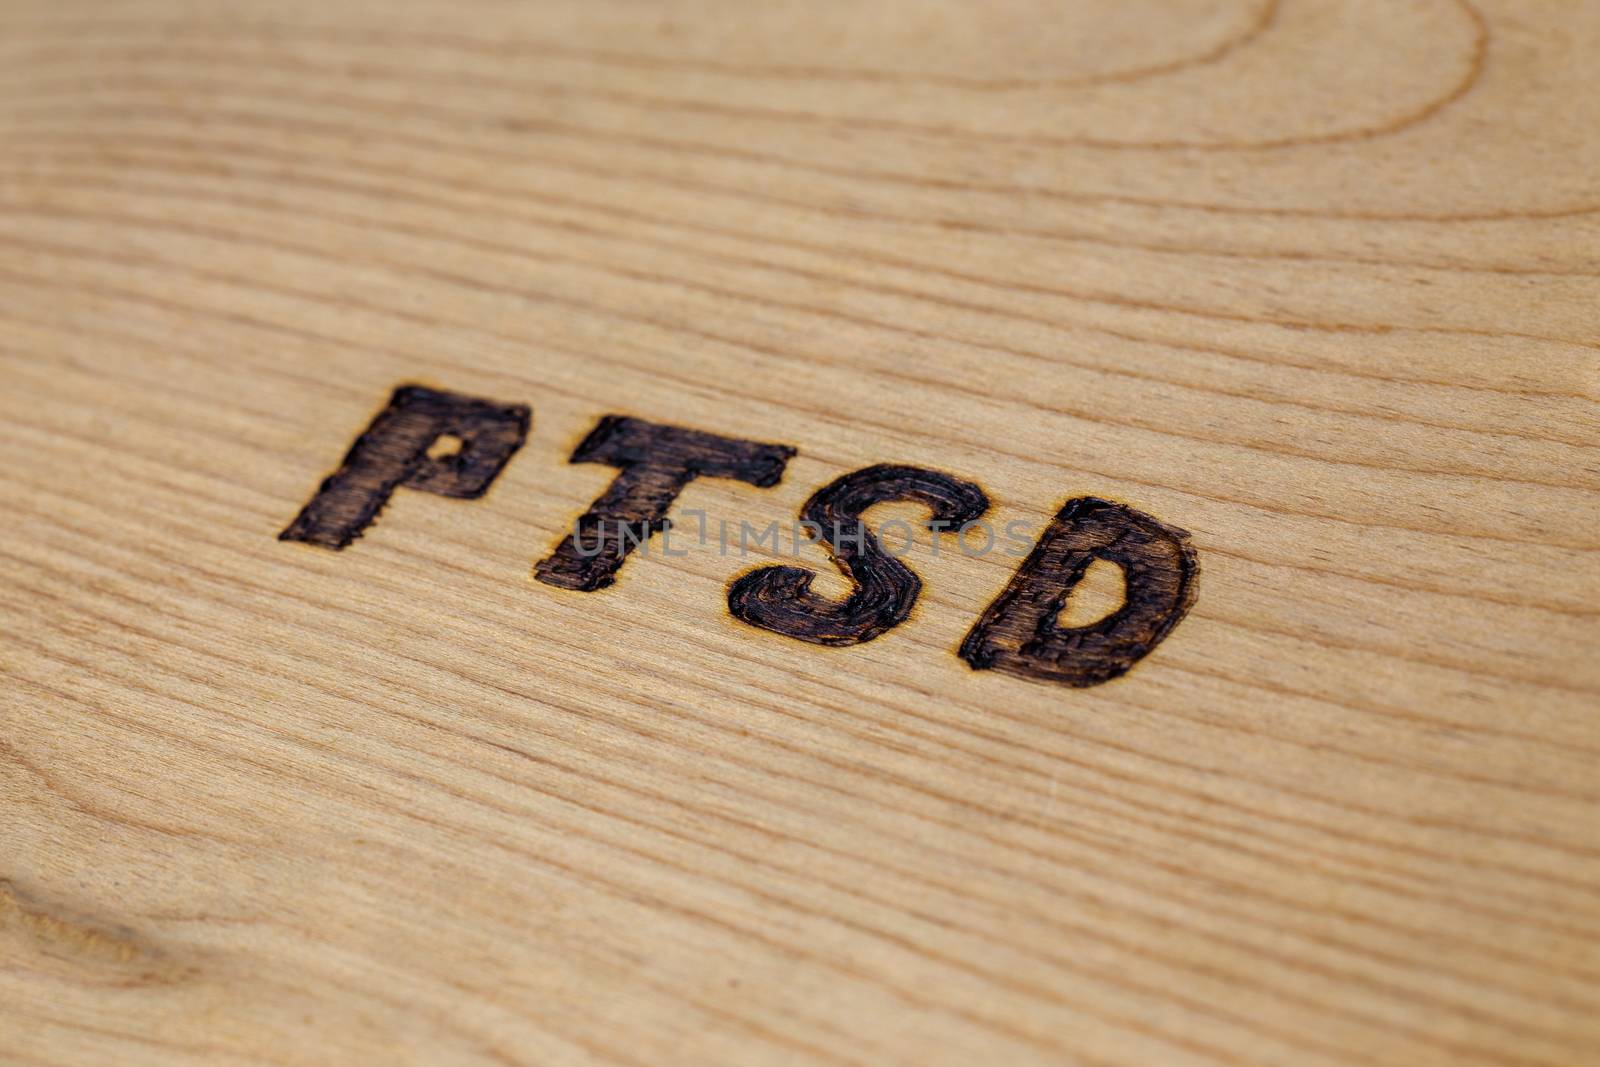 An abbreviation PTSD - post traumatic stress disorder - burned by hand on flat wooden board in diagonal composition. Close-up with selective focus.